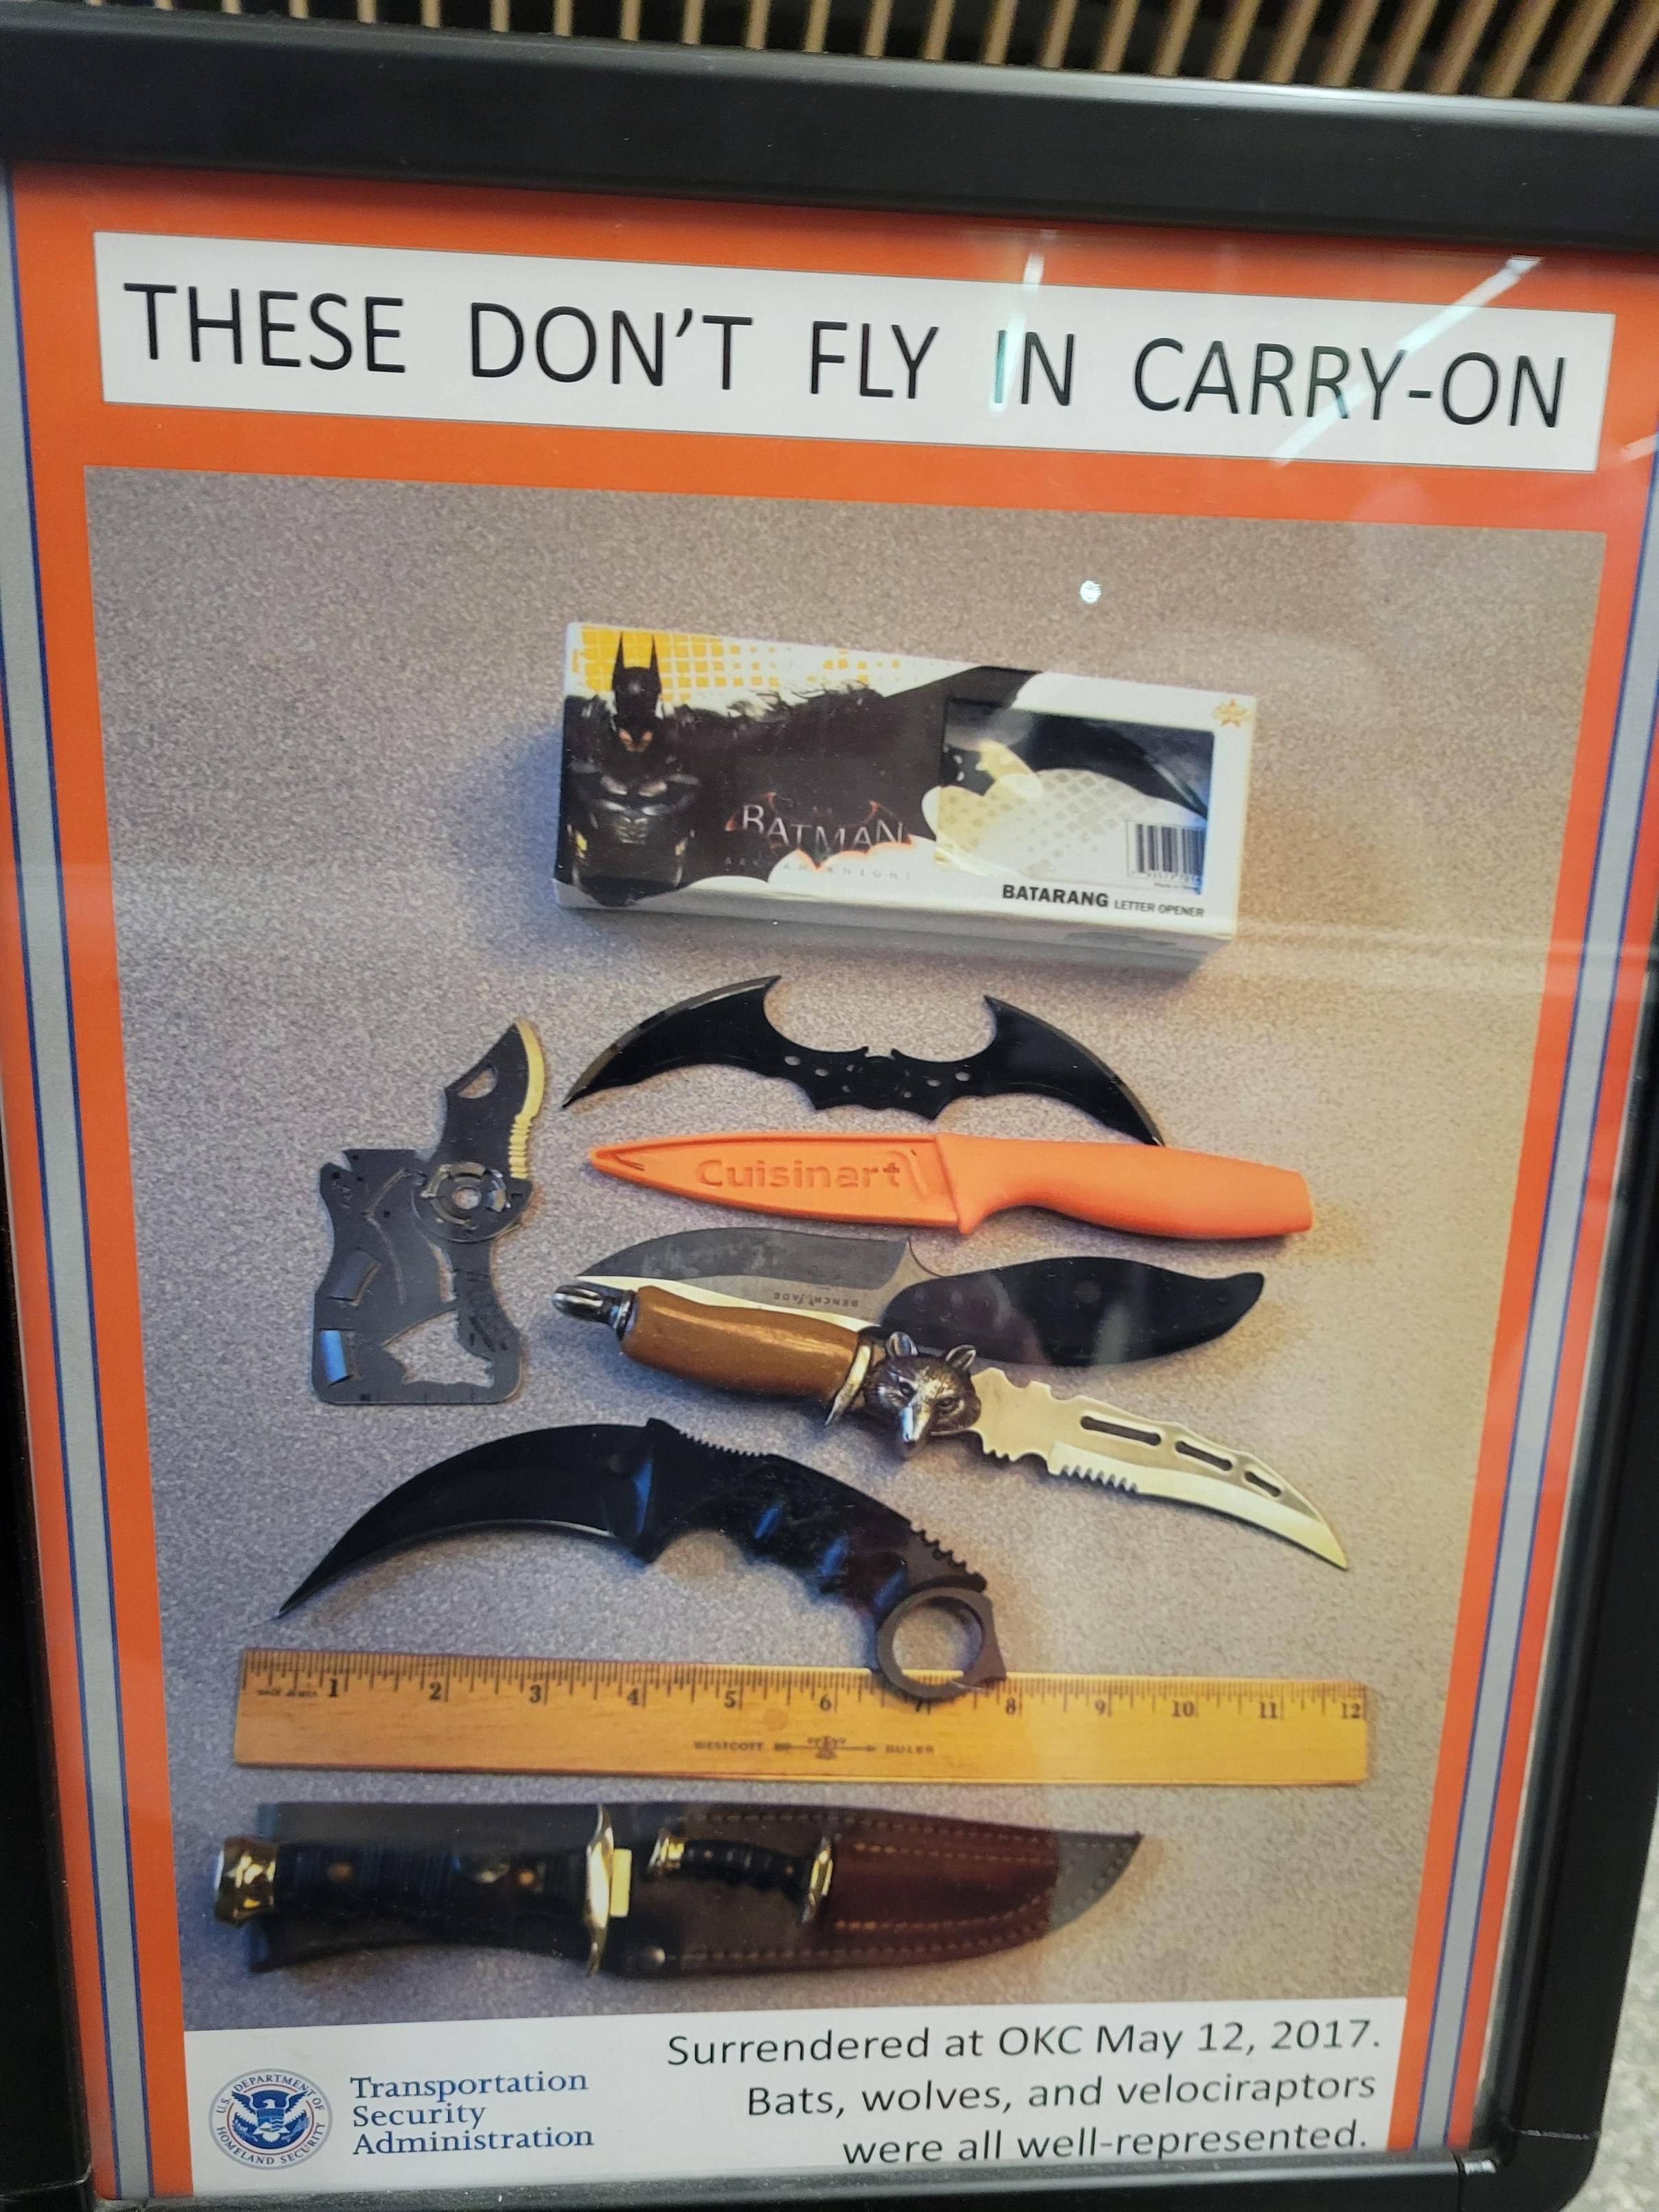 Safety first! No bringing your Batarangs on the planes!